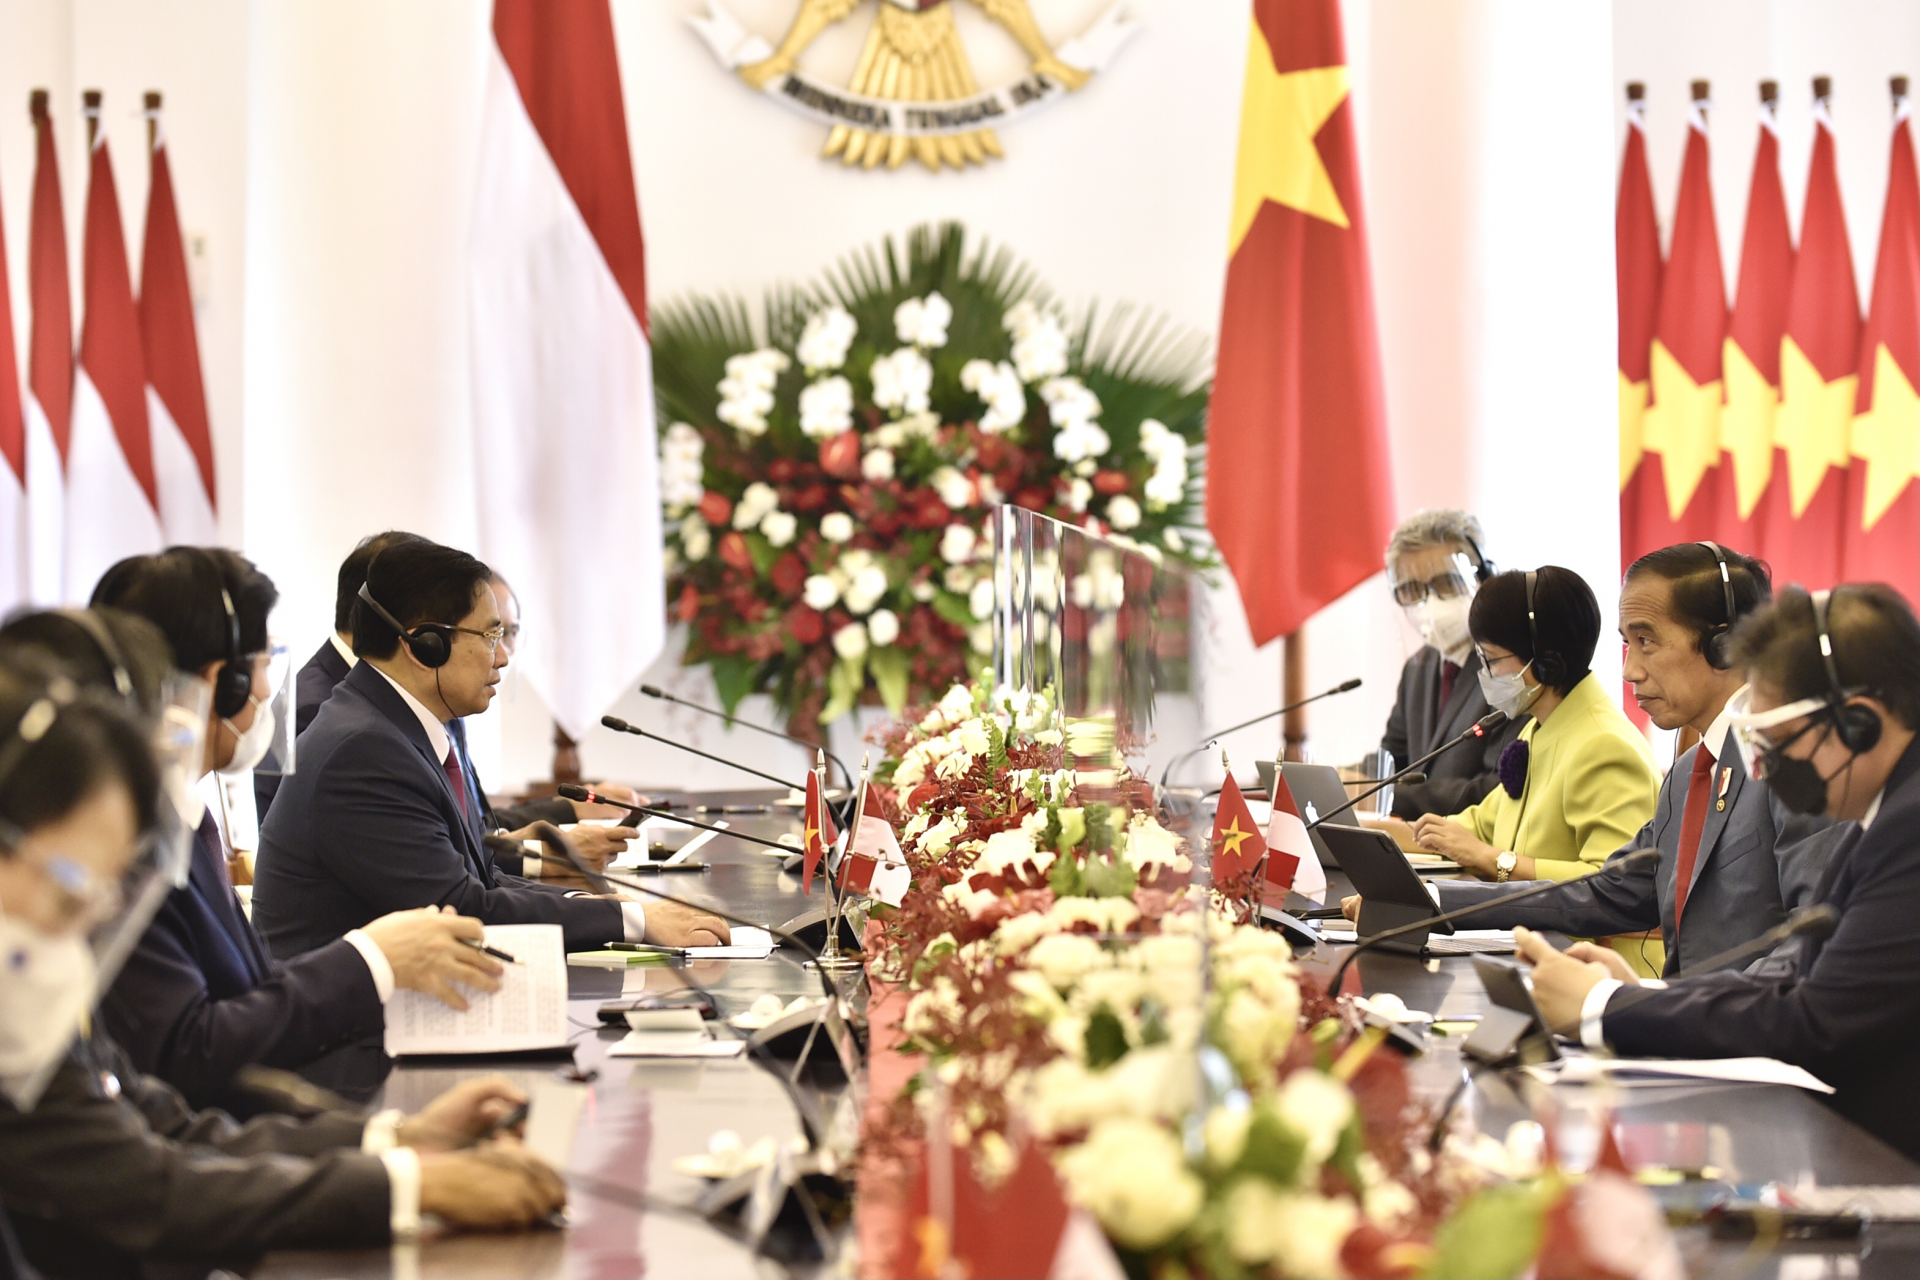 Vietnamese Prime Minister Holds Talks With Indonesian President Ahead of Regional Leaders’ Meeting